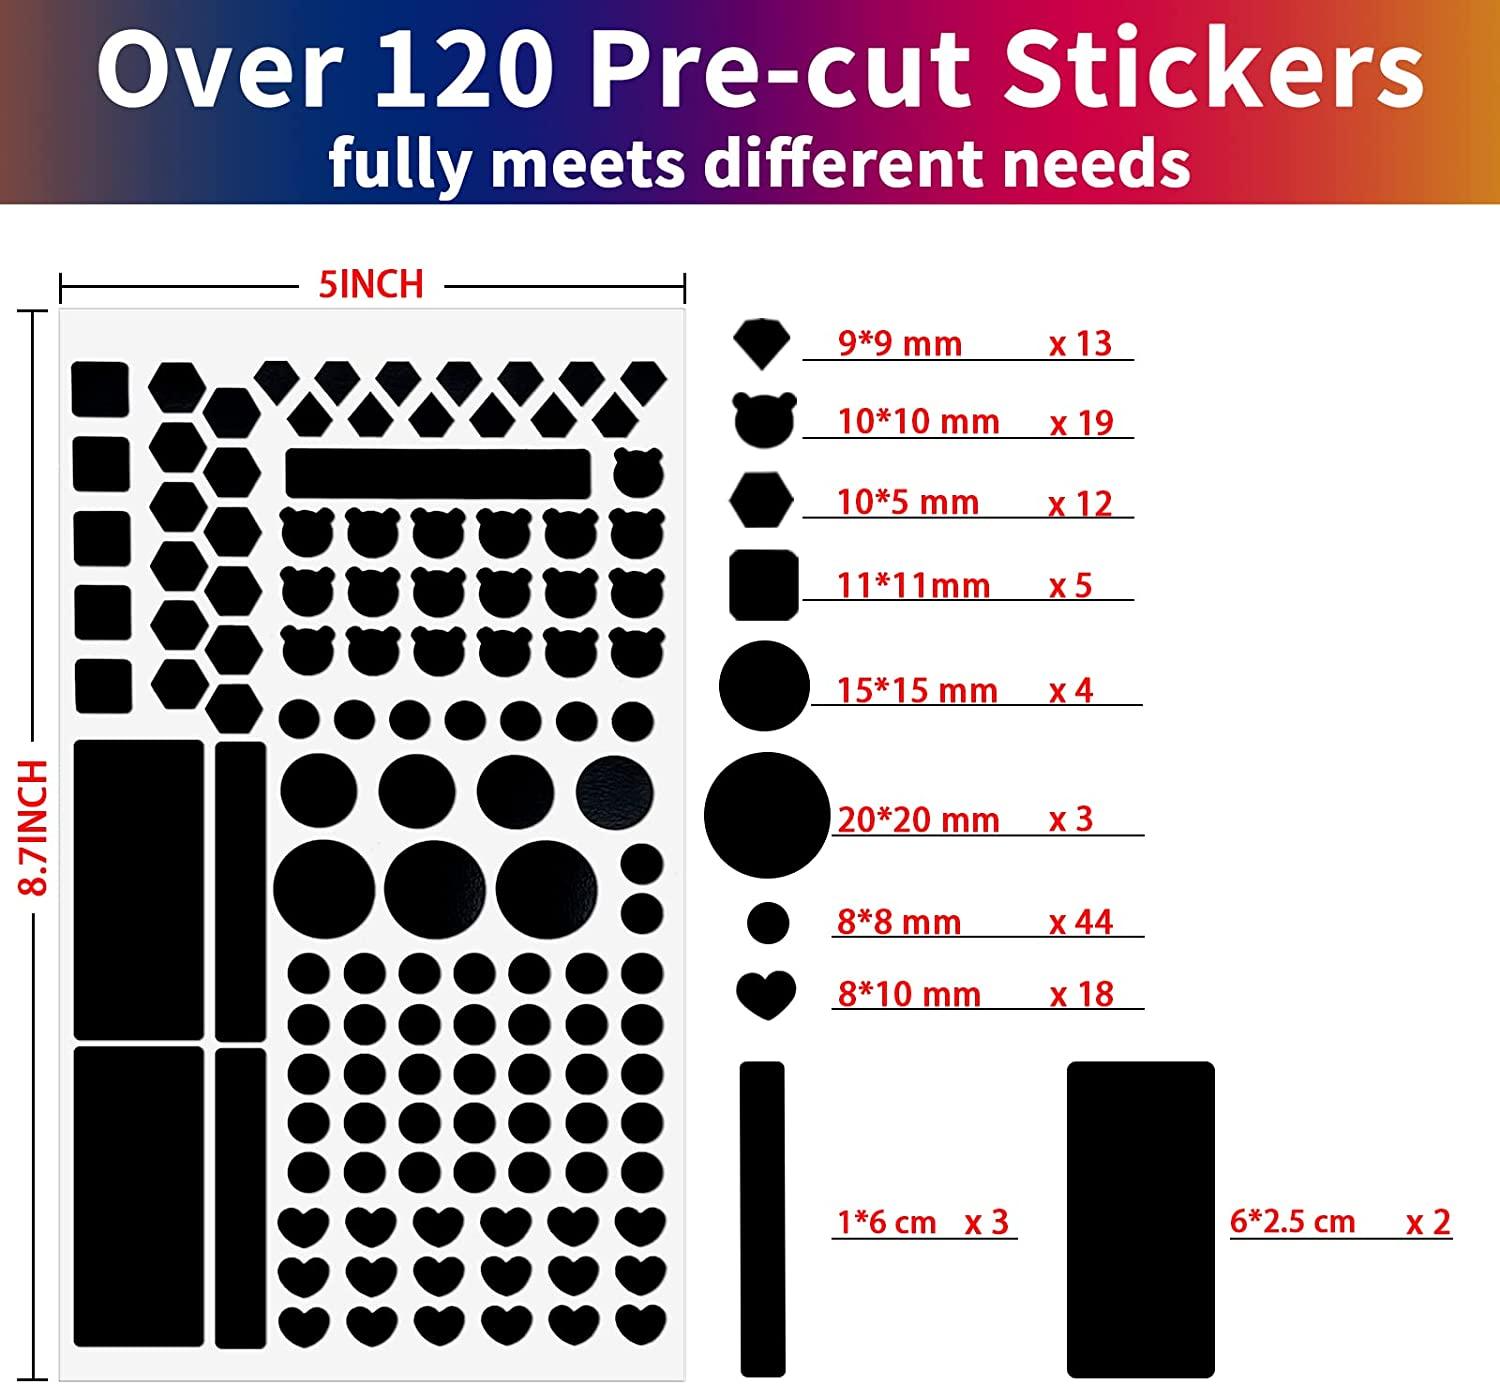 Birllaid Light Blocking Stickers, Black Out Stickers, Light Dimming  Stickers LED Covers for Routers, Clocks and Electrical Appliances 1oo%  Blackout